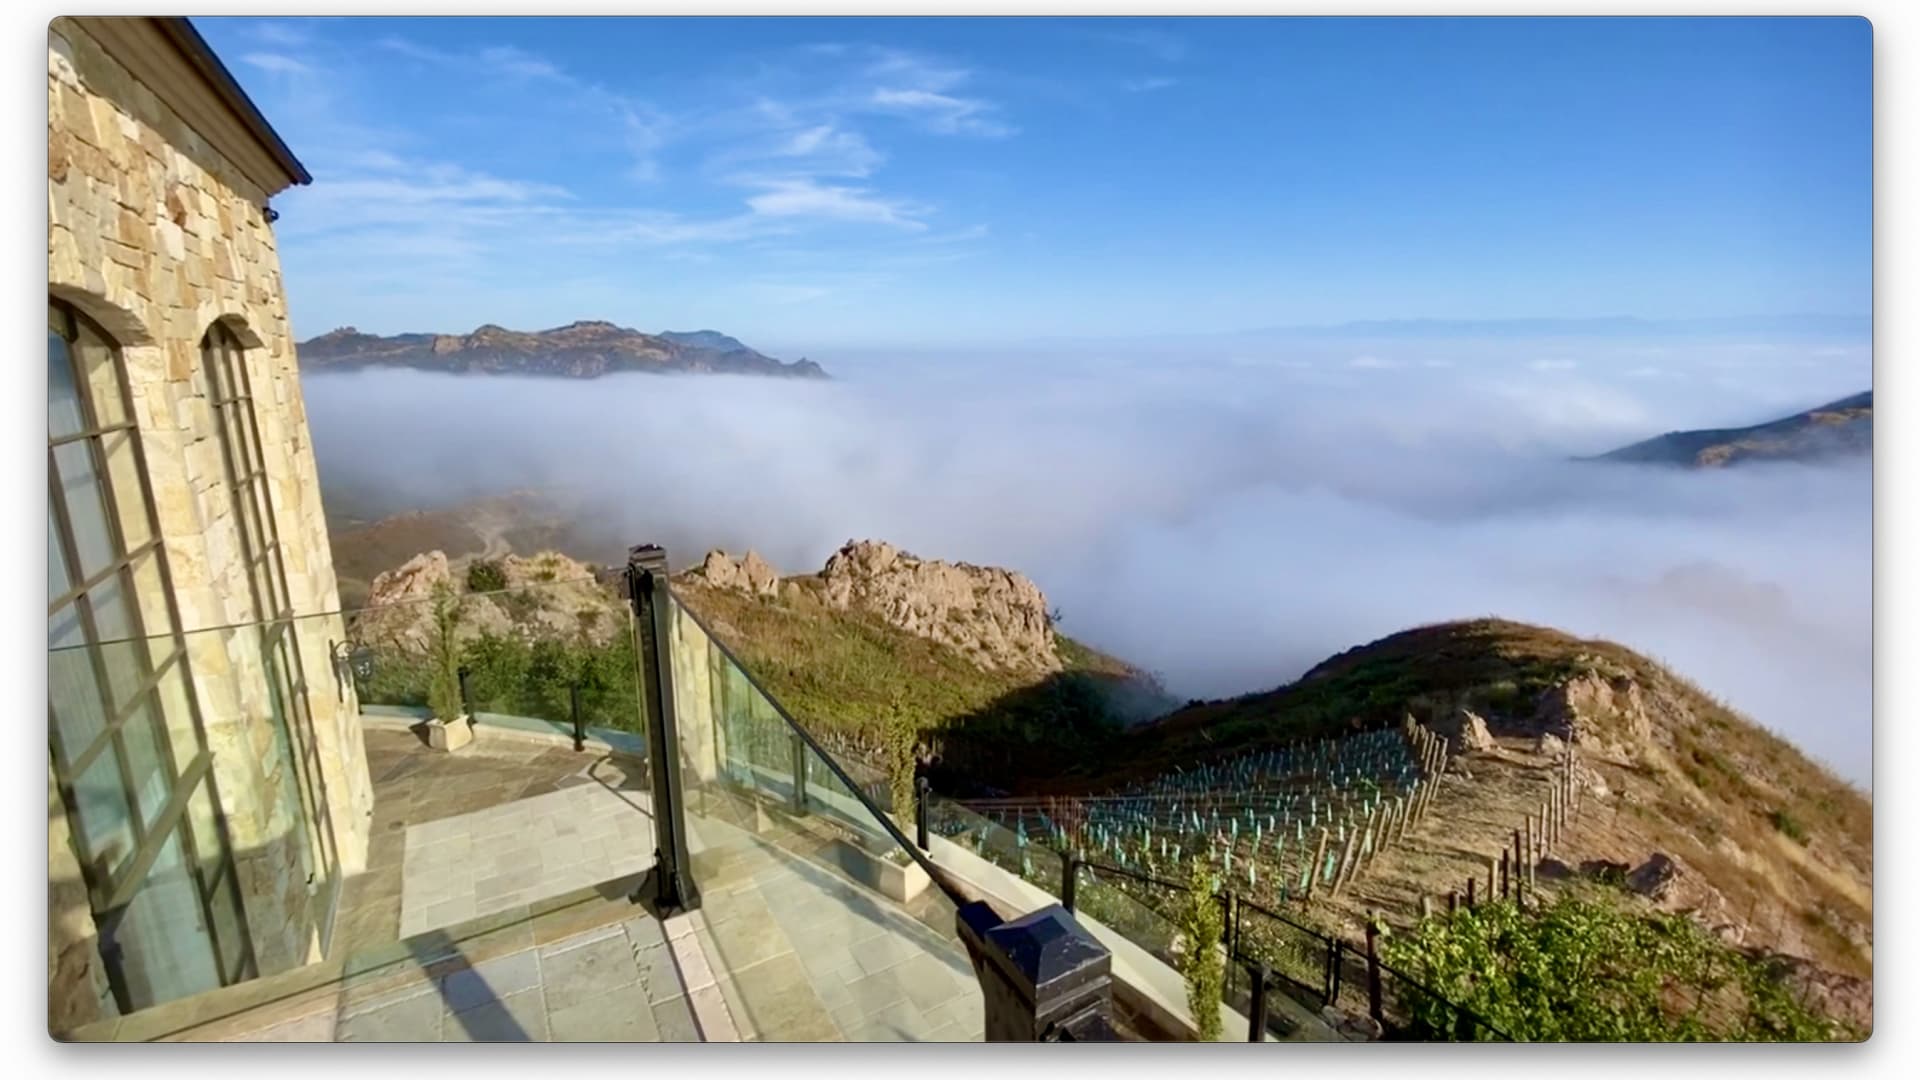 The view at 2,000 feet sometimes puts the villa high above the clouds.